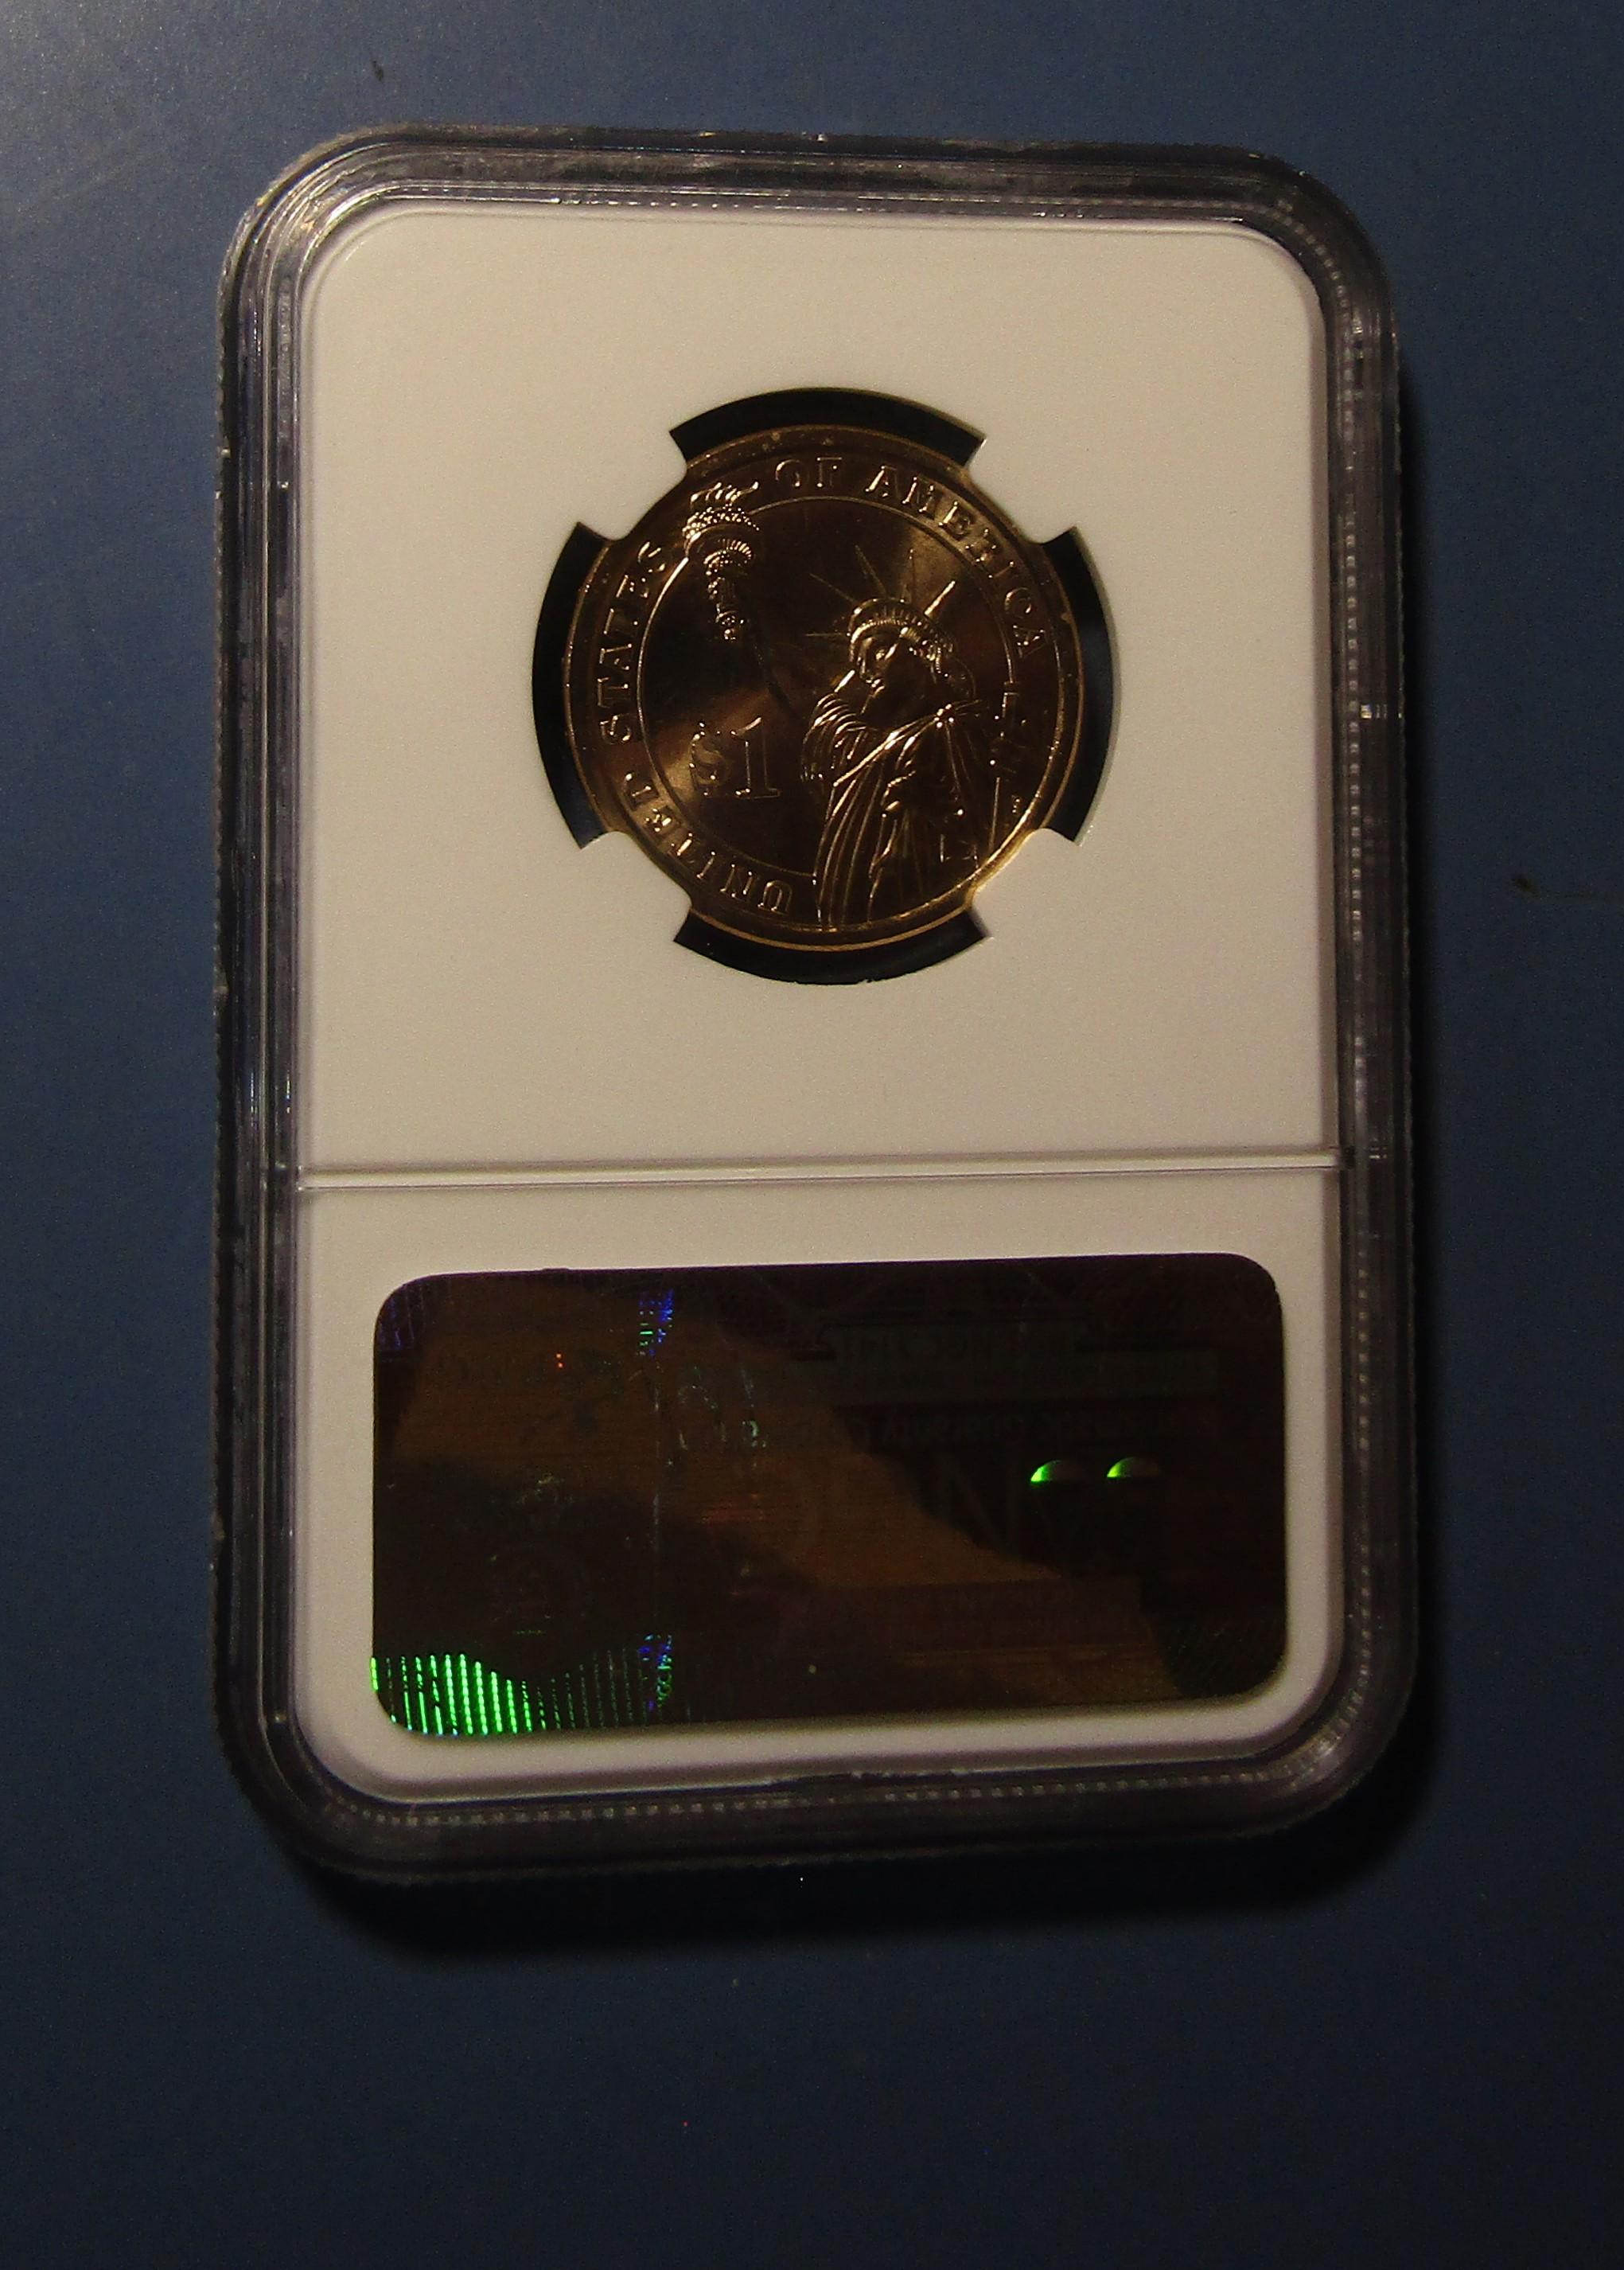 2011-D RUTHERFORD B HAYES GOLD DOLLAR NGC MS-67